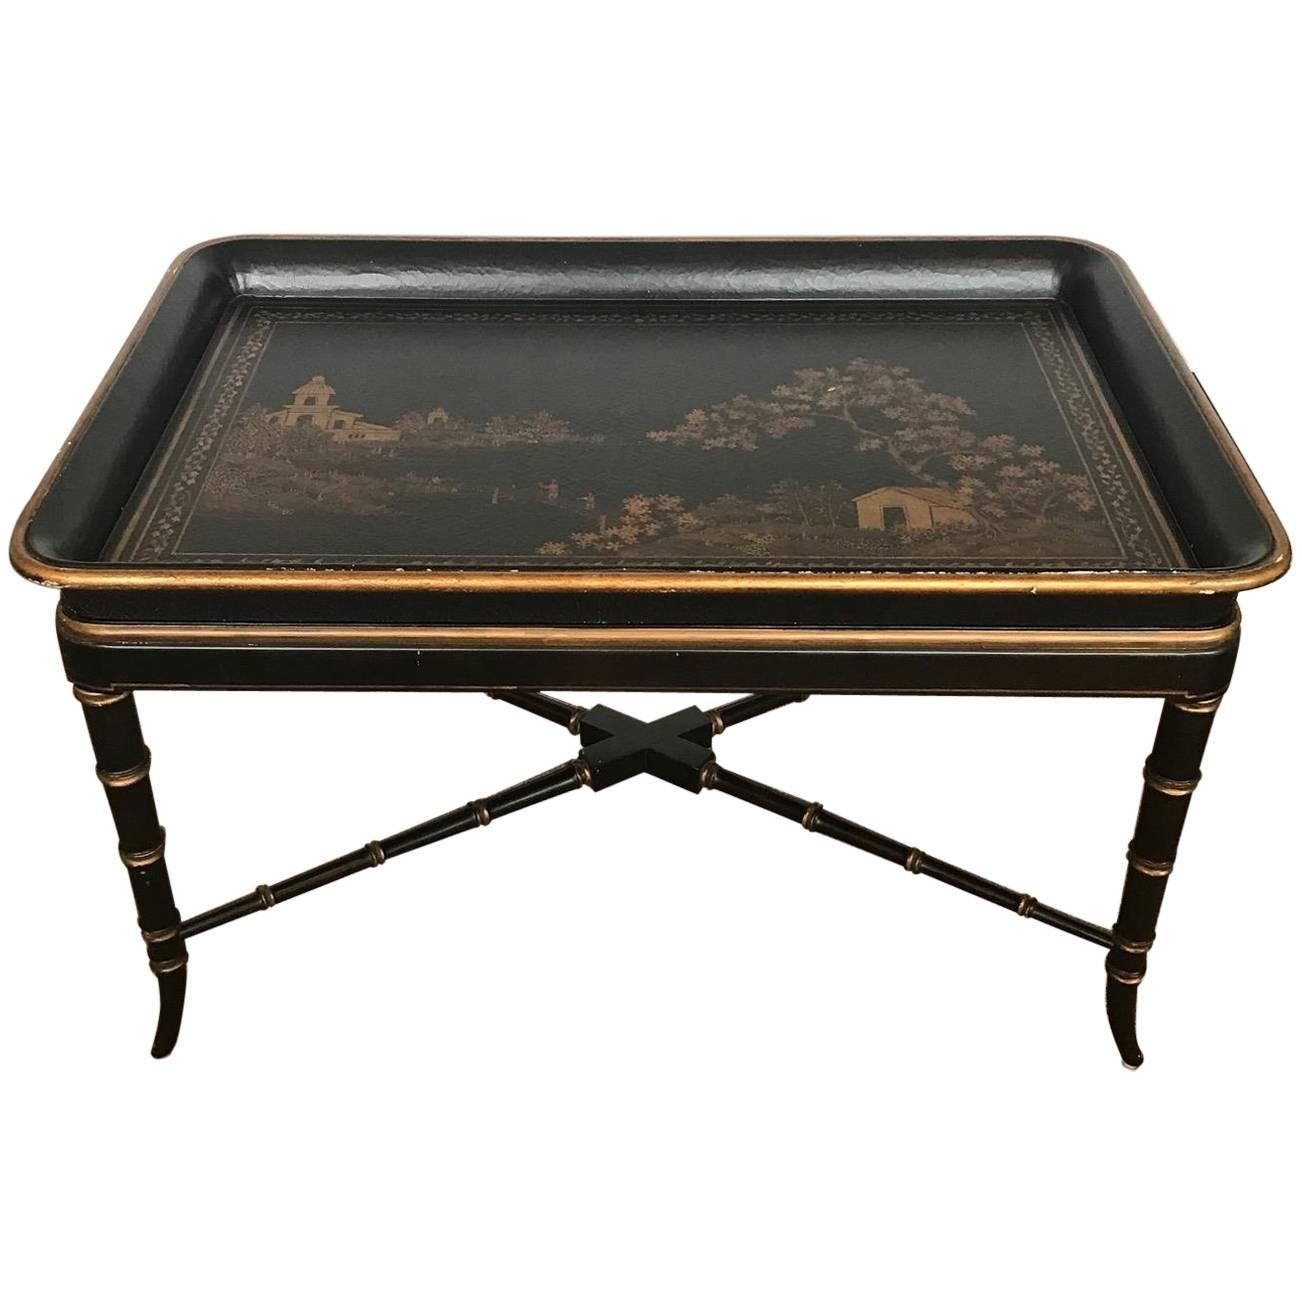 17th and 18th Century Western Style Chinoiserie and Gilt Wooden Tray Table